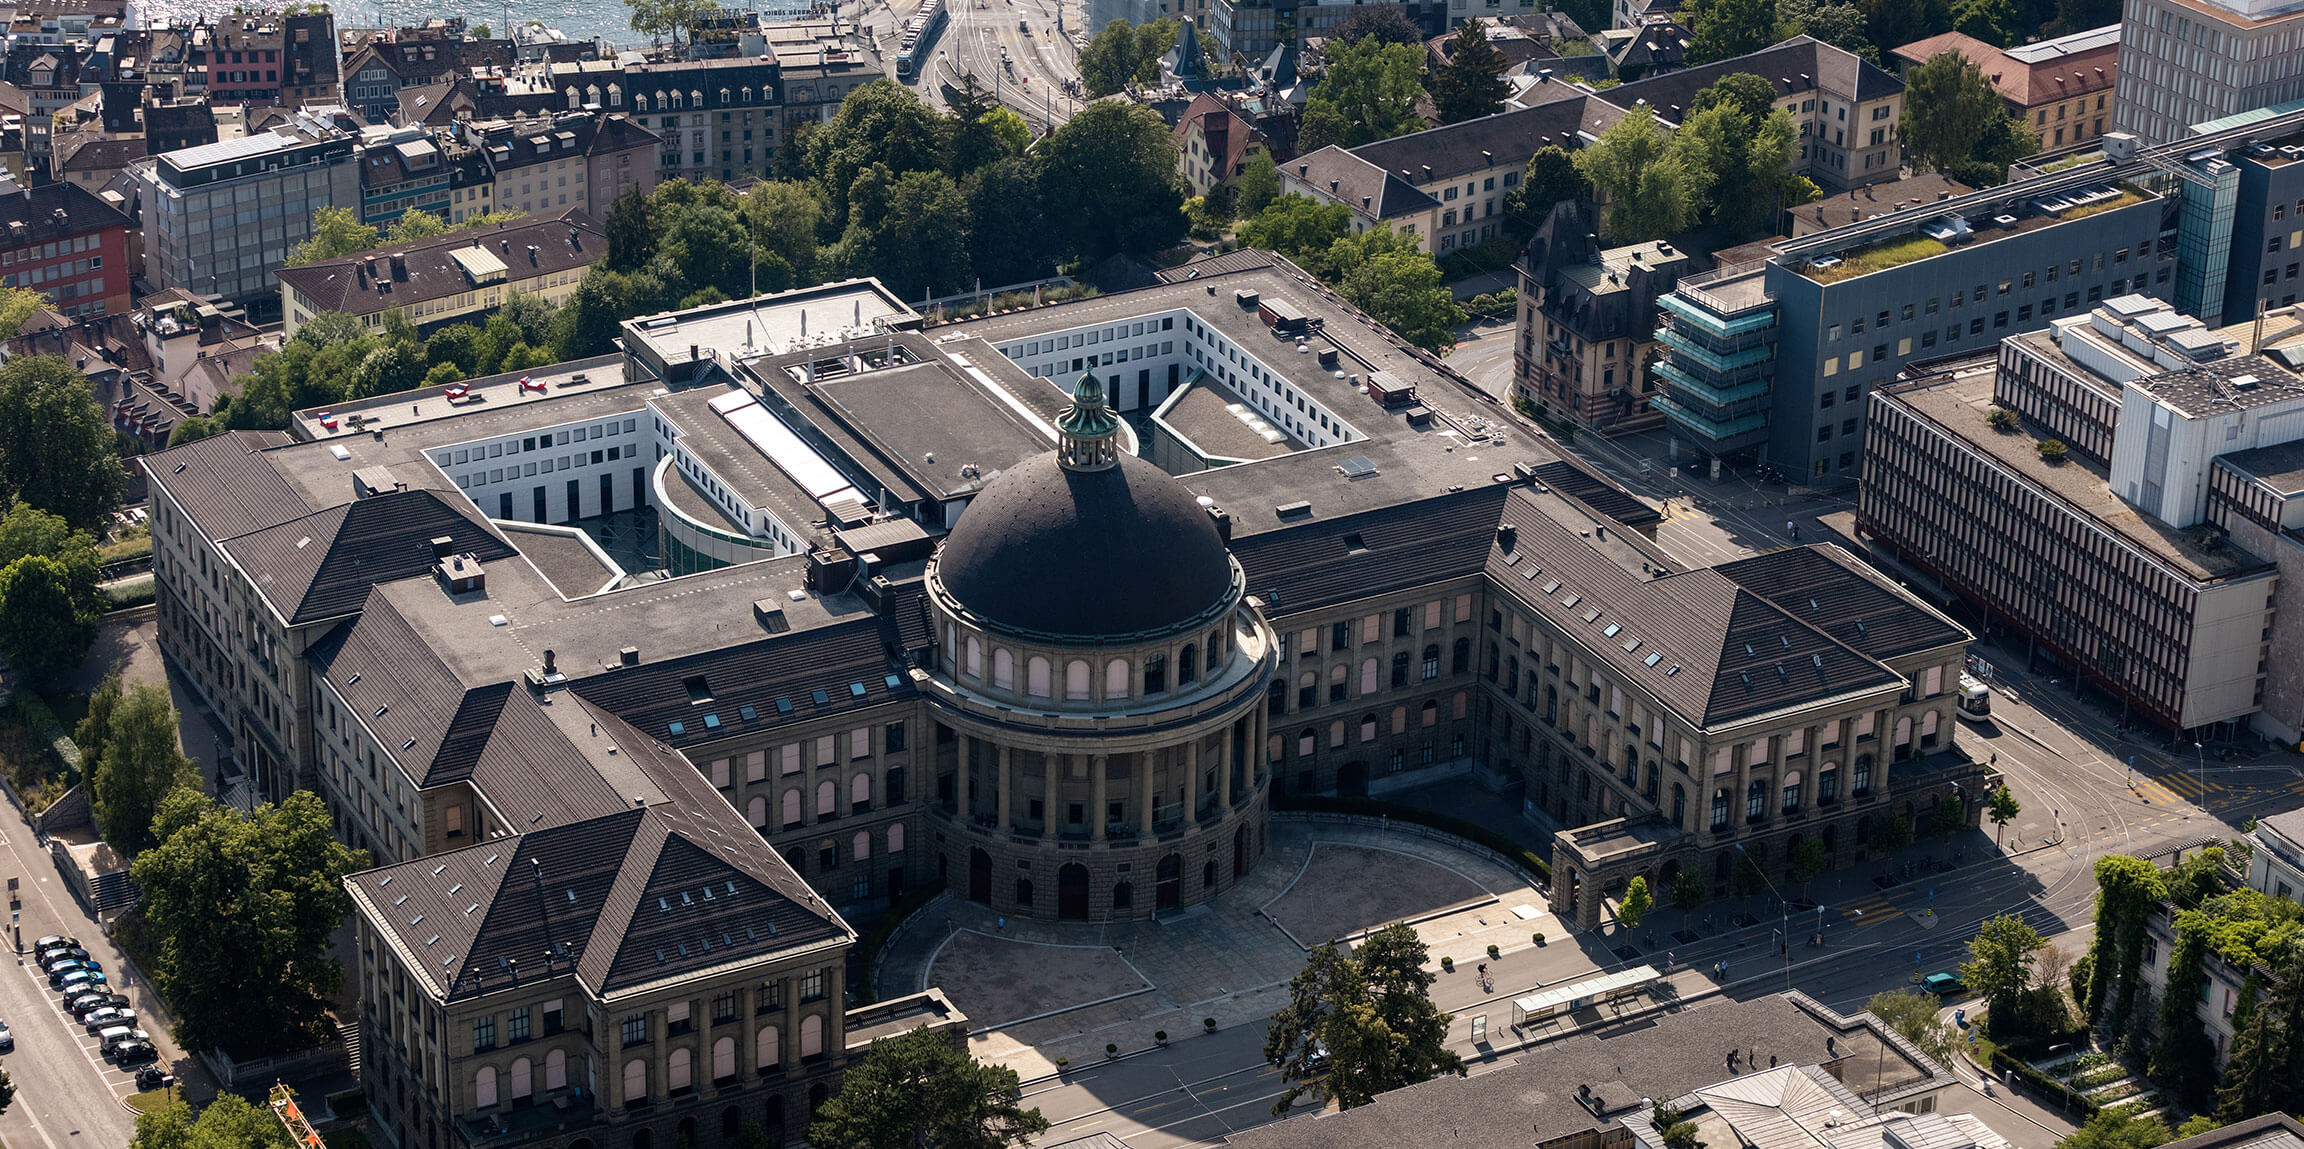 eth zurich thesis repository